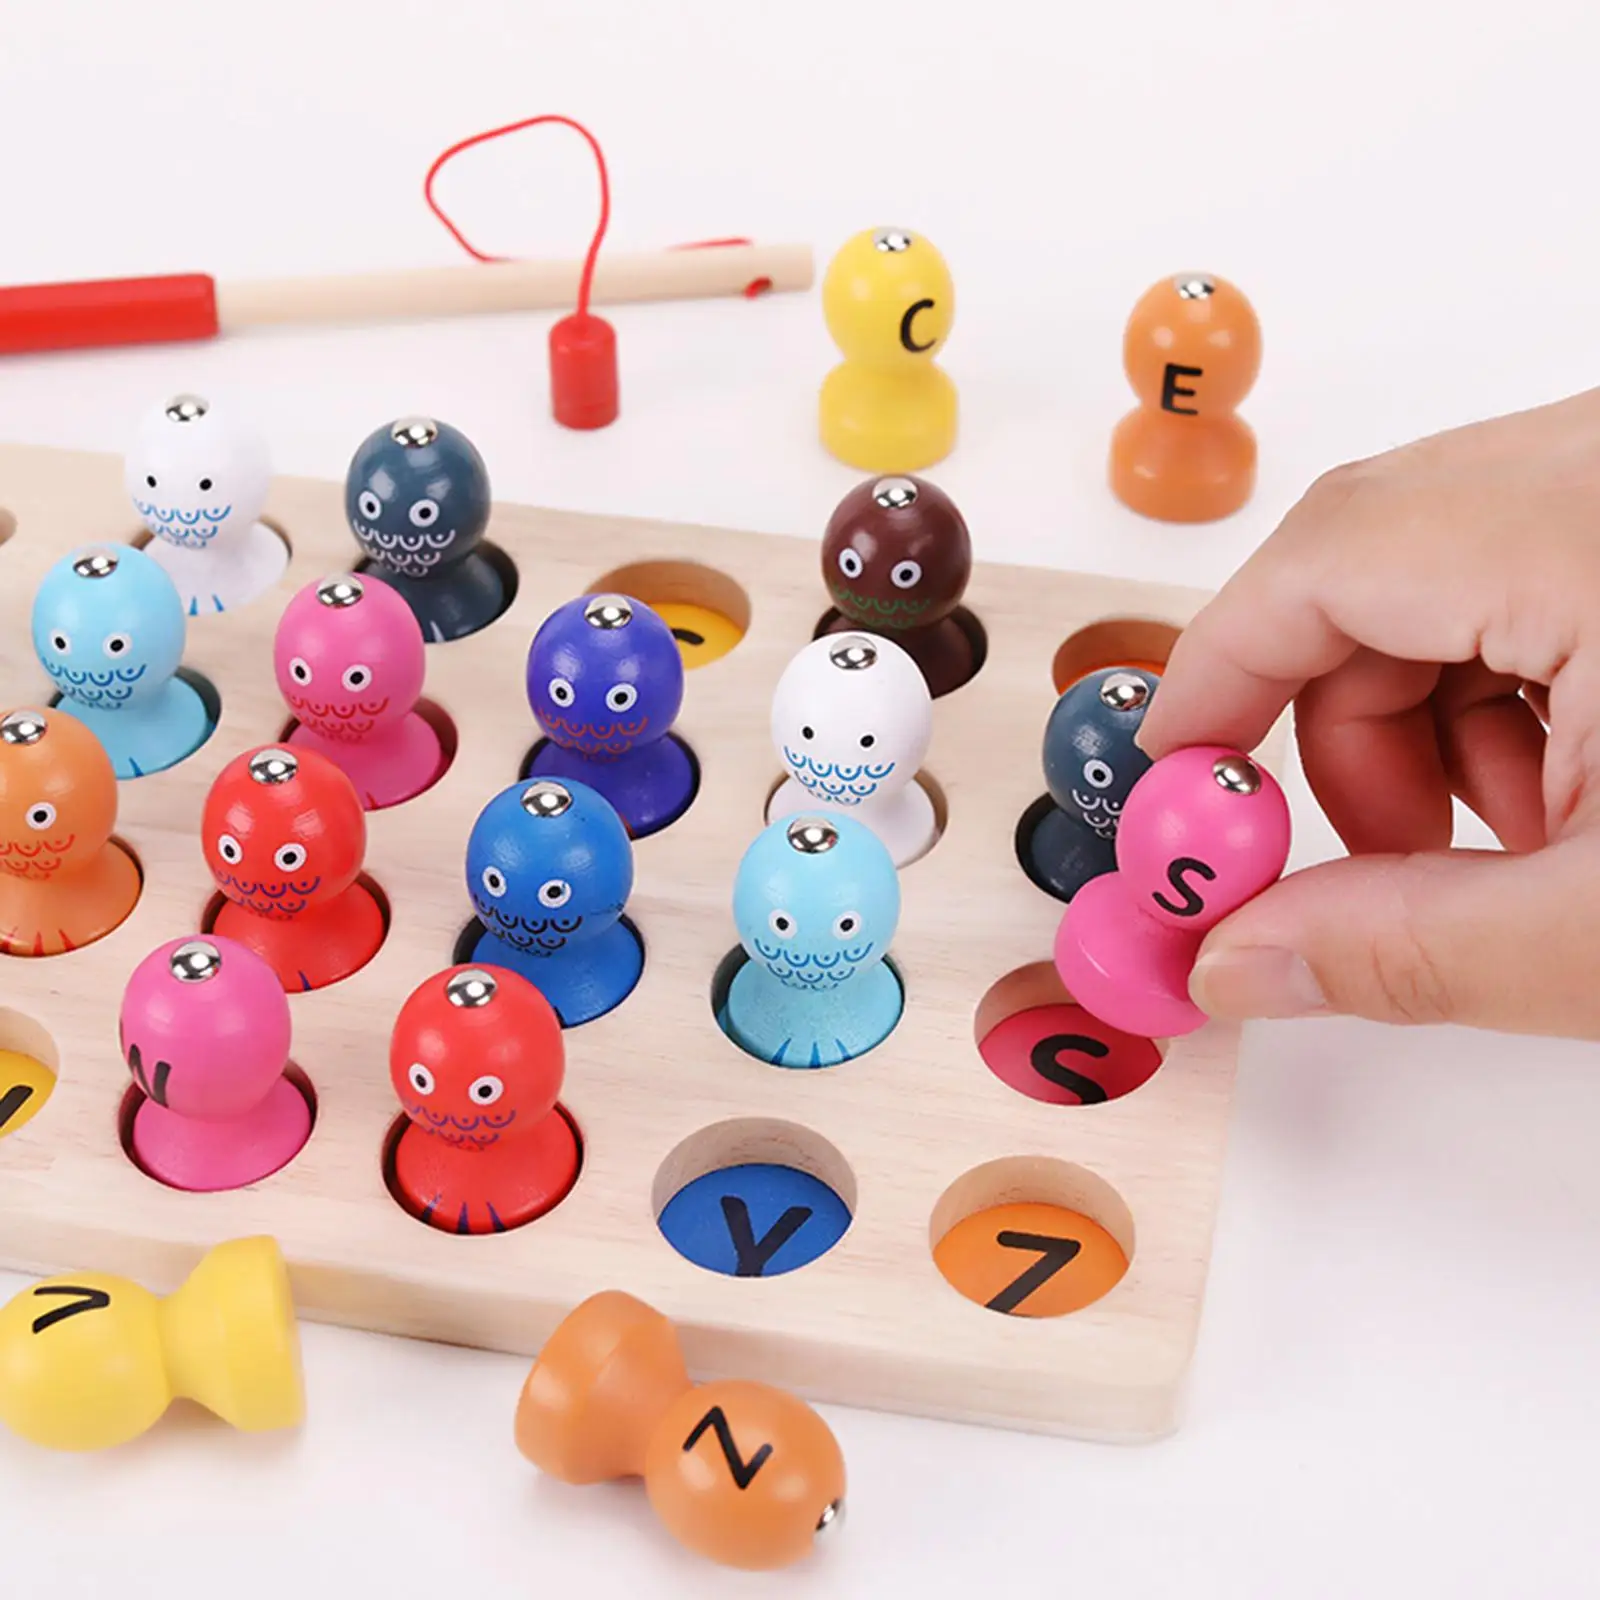 Wooden Magnetic Fishing Game Hands on Abilities Learning Abc Letter Toy for Girls Boys Gift Kindergarten Ages 3 4 5 6 7 8 and up